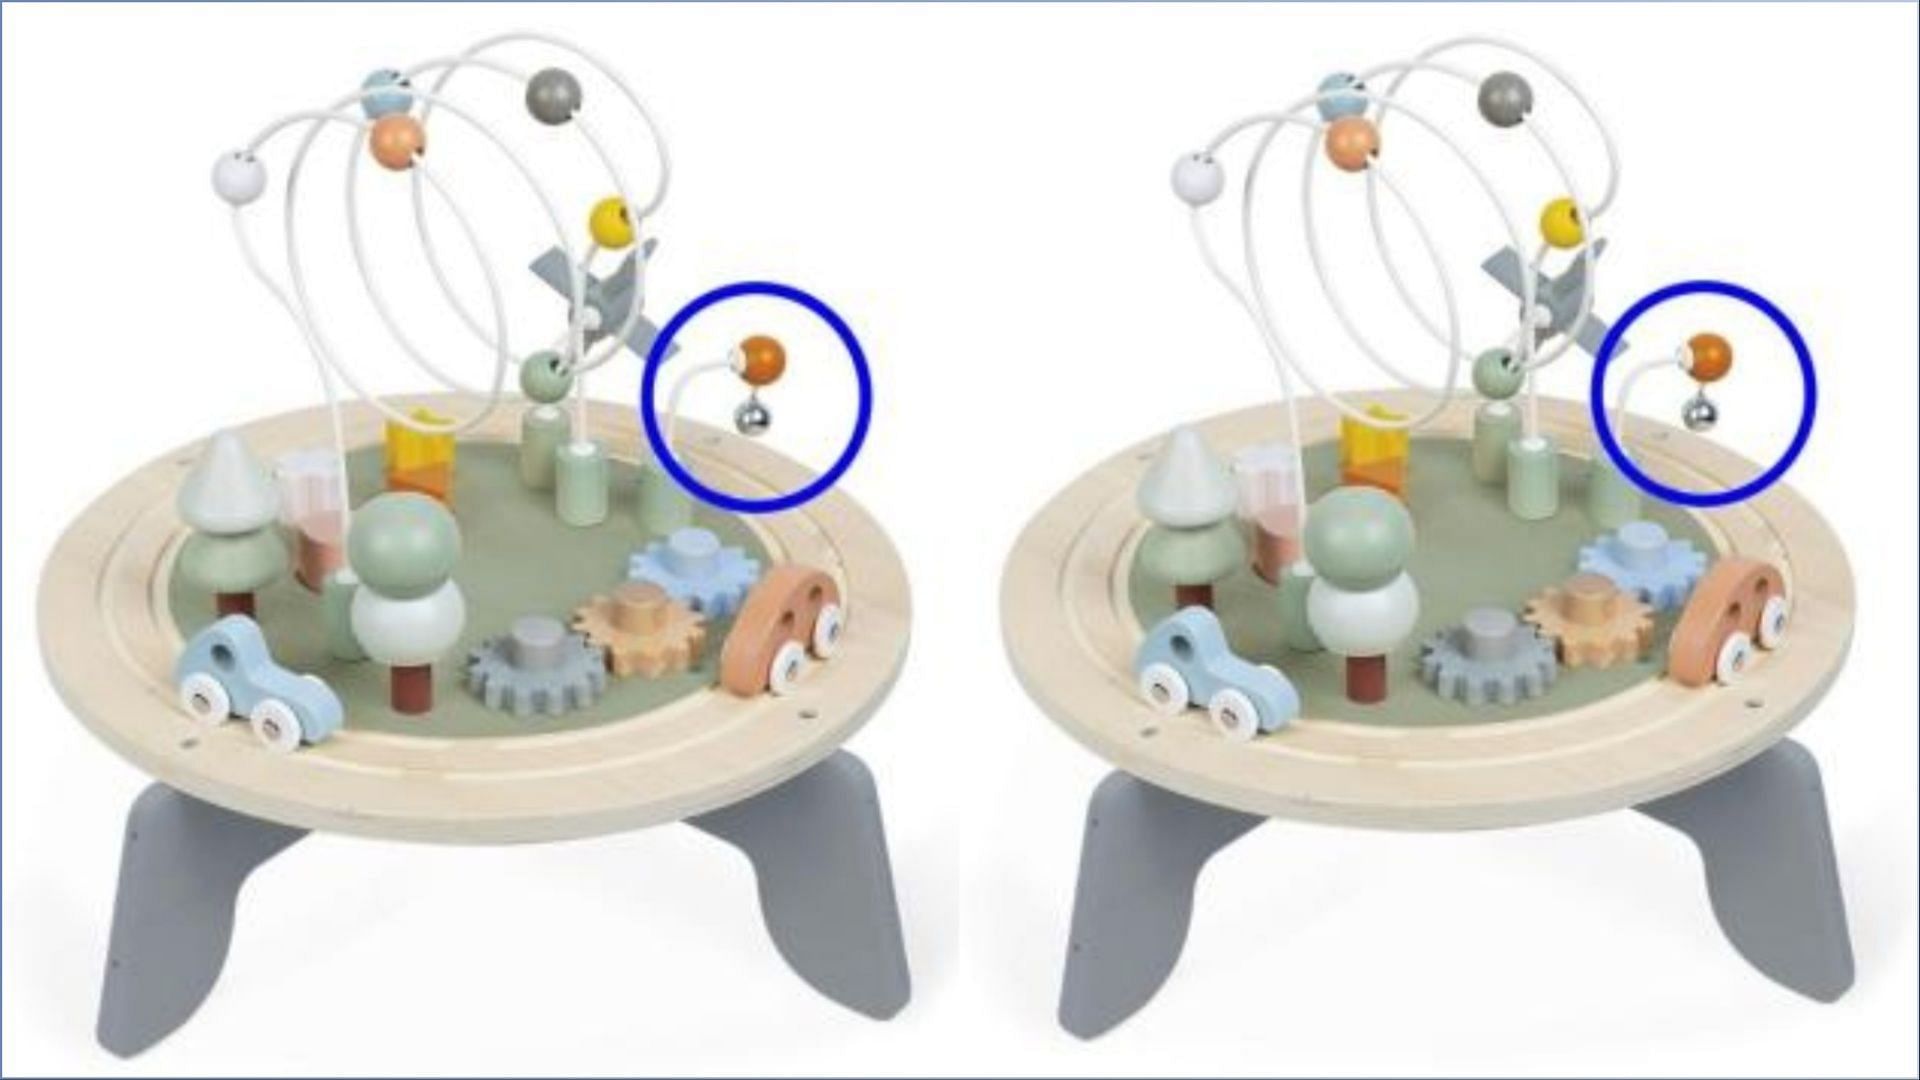 The round J04402 Janod Sweet Cocoon Activity Tables (Image via CPSC)